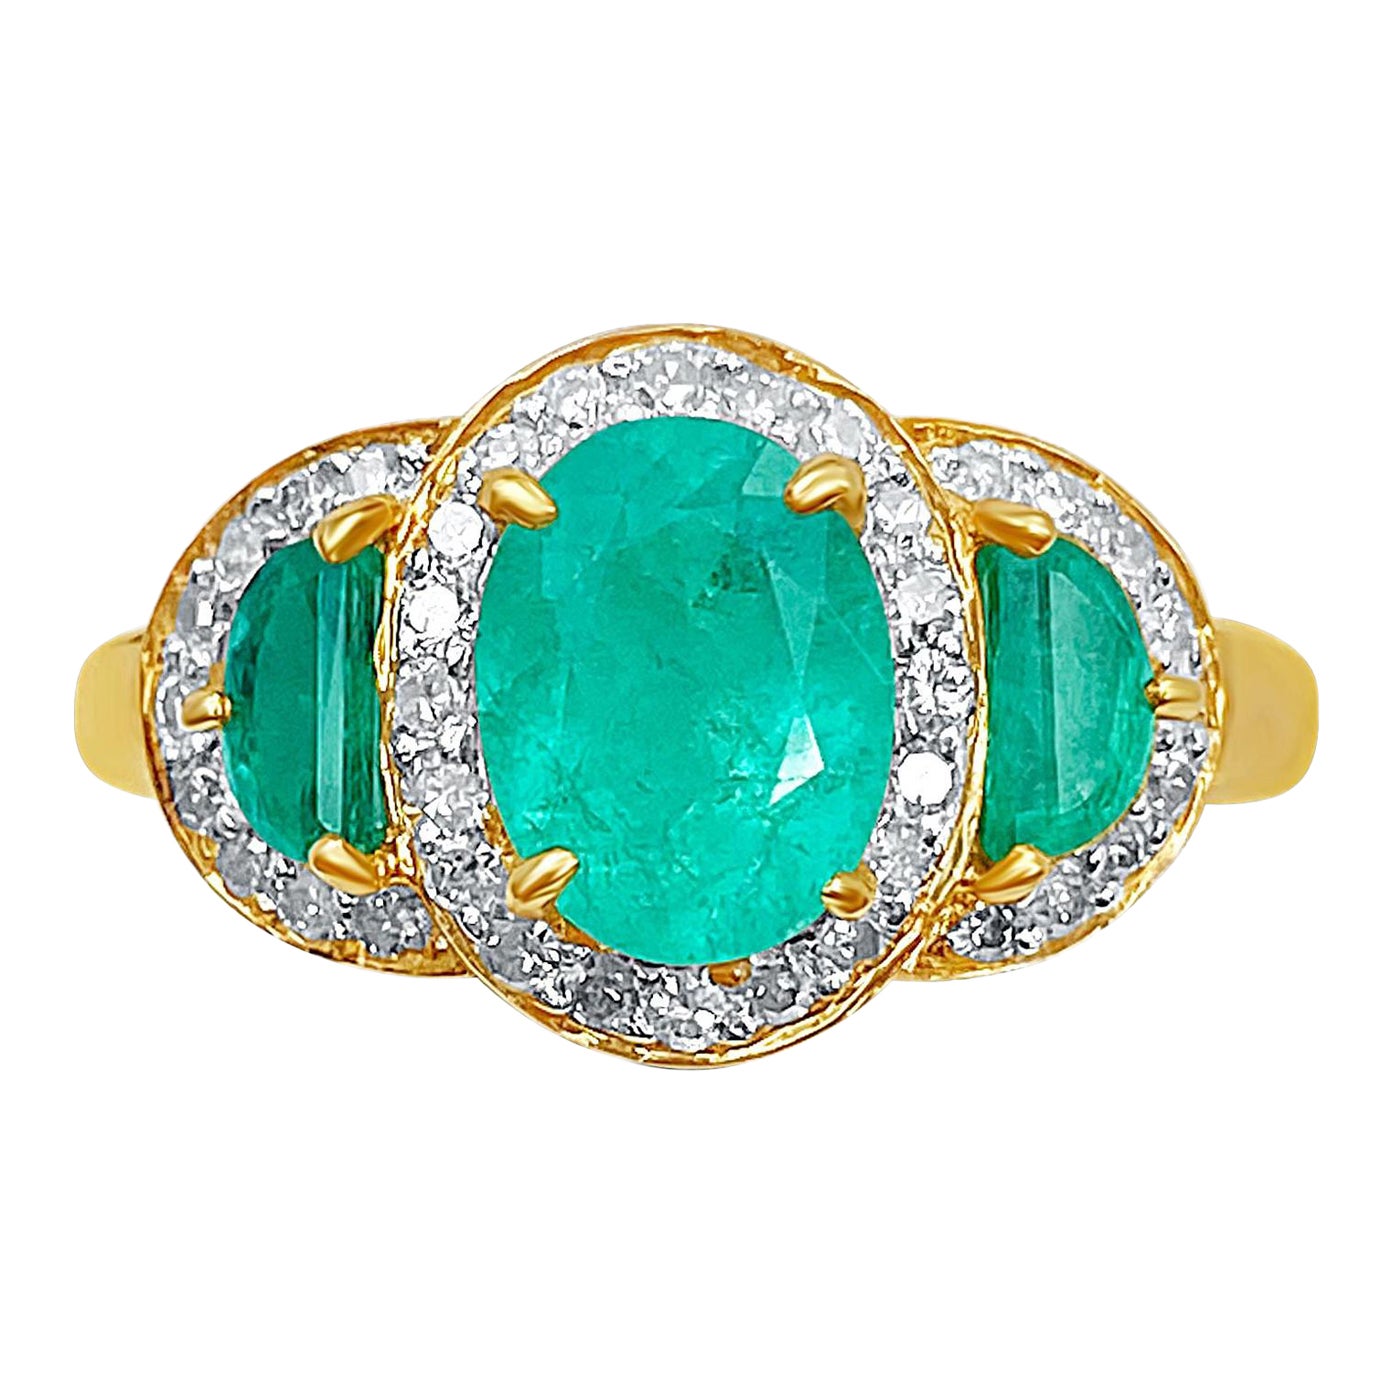 1.60 Carat Oval Cut Colombian Emerald, Diamond, and 18K Yellow Gold Ring For Sale